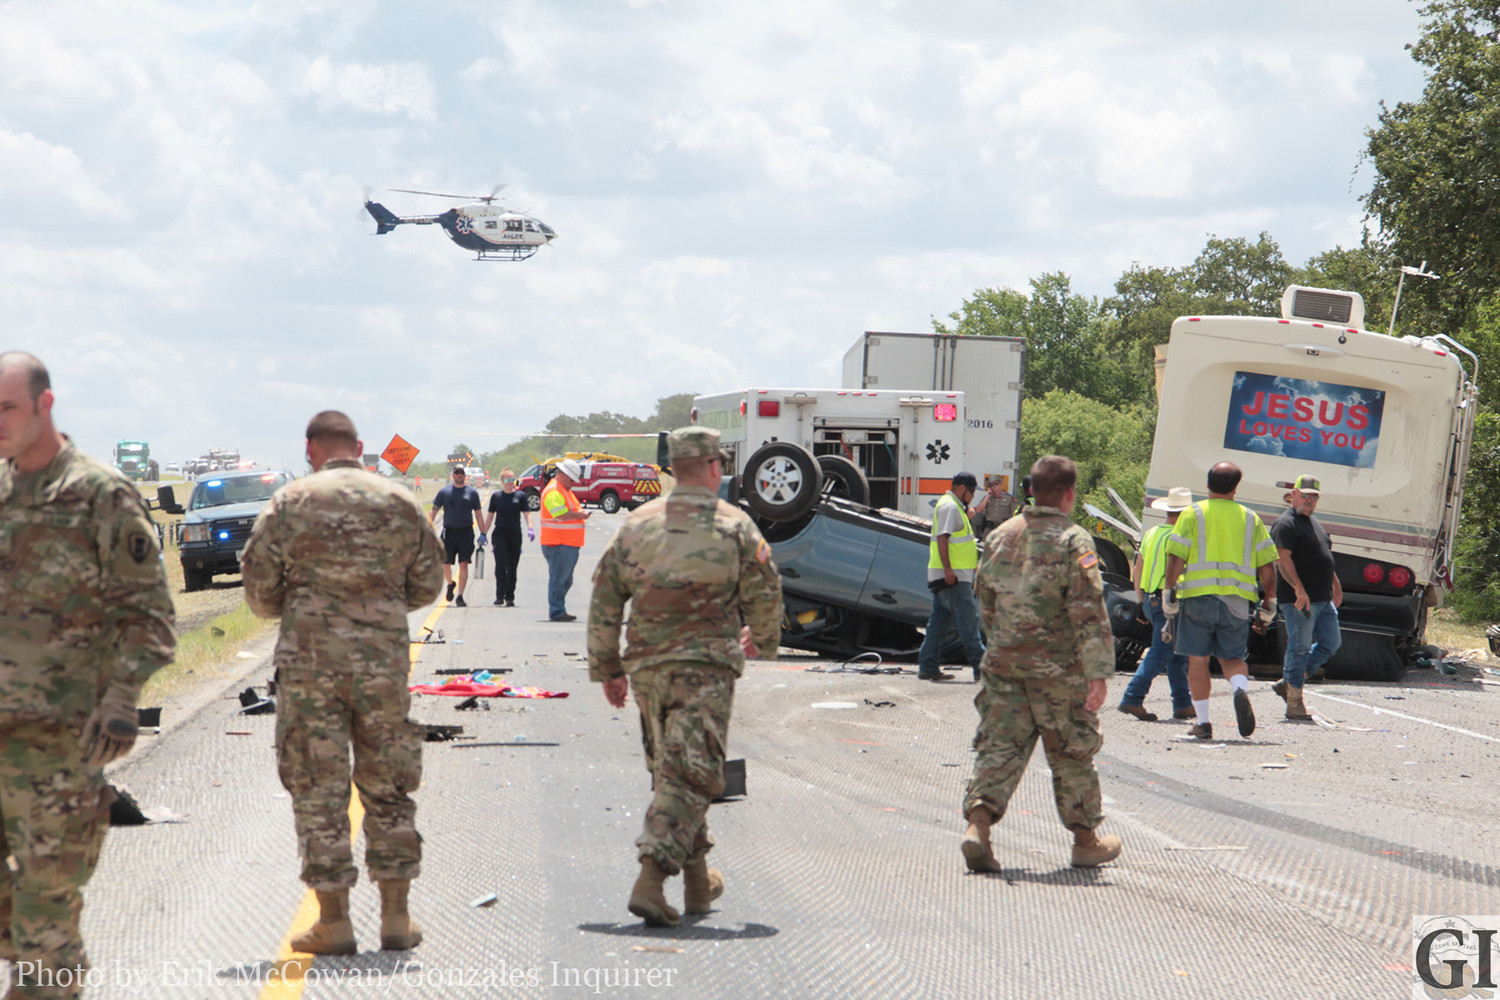 Members of the Texas National Guard's 442nd Engineering Company from Angleton are seen assisting at the scene of a major crash last week on I10 that took the lives of two occupants of an RV. The soldiers were headed home from a weekend of training and were the first on scene to render aid and support to the victims.